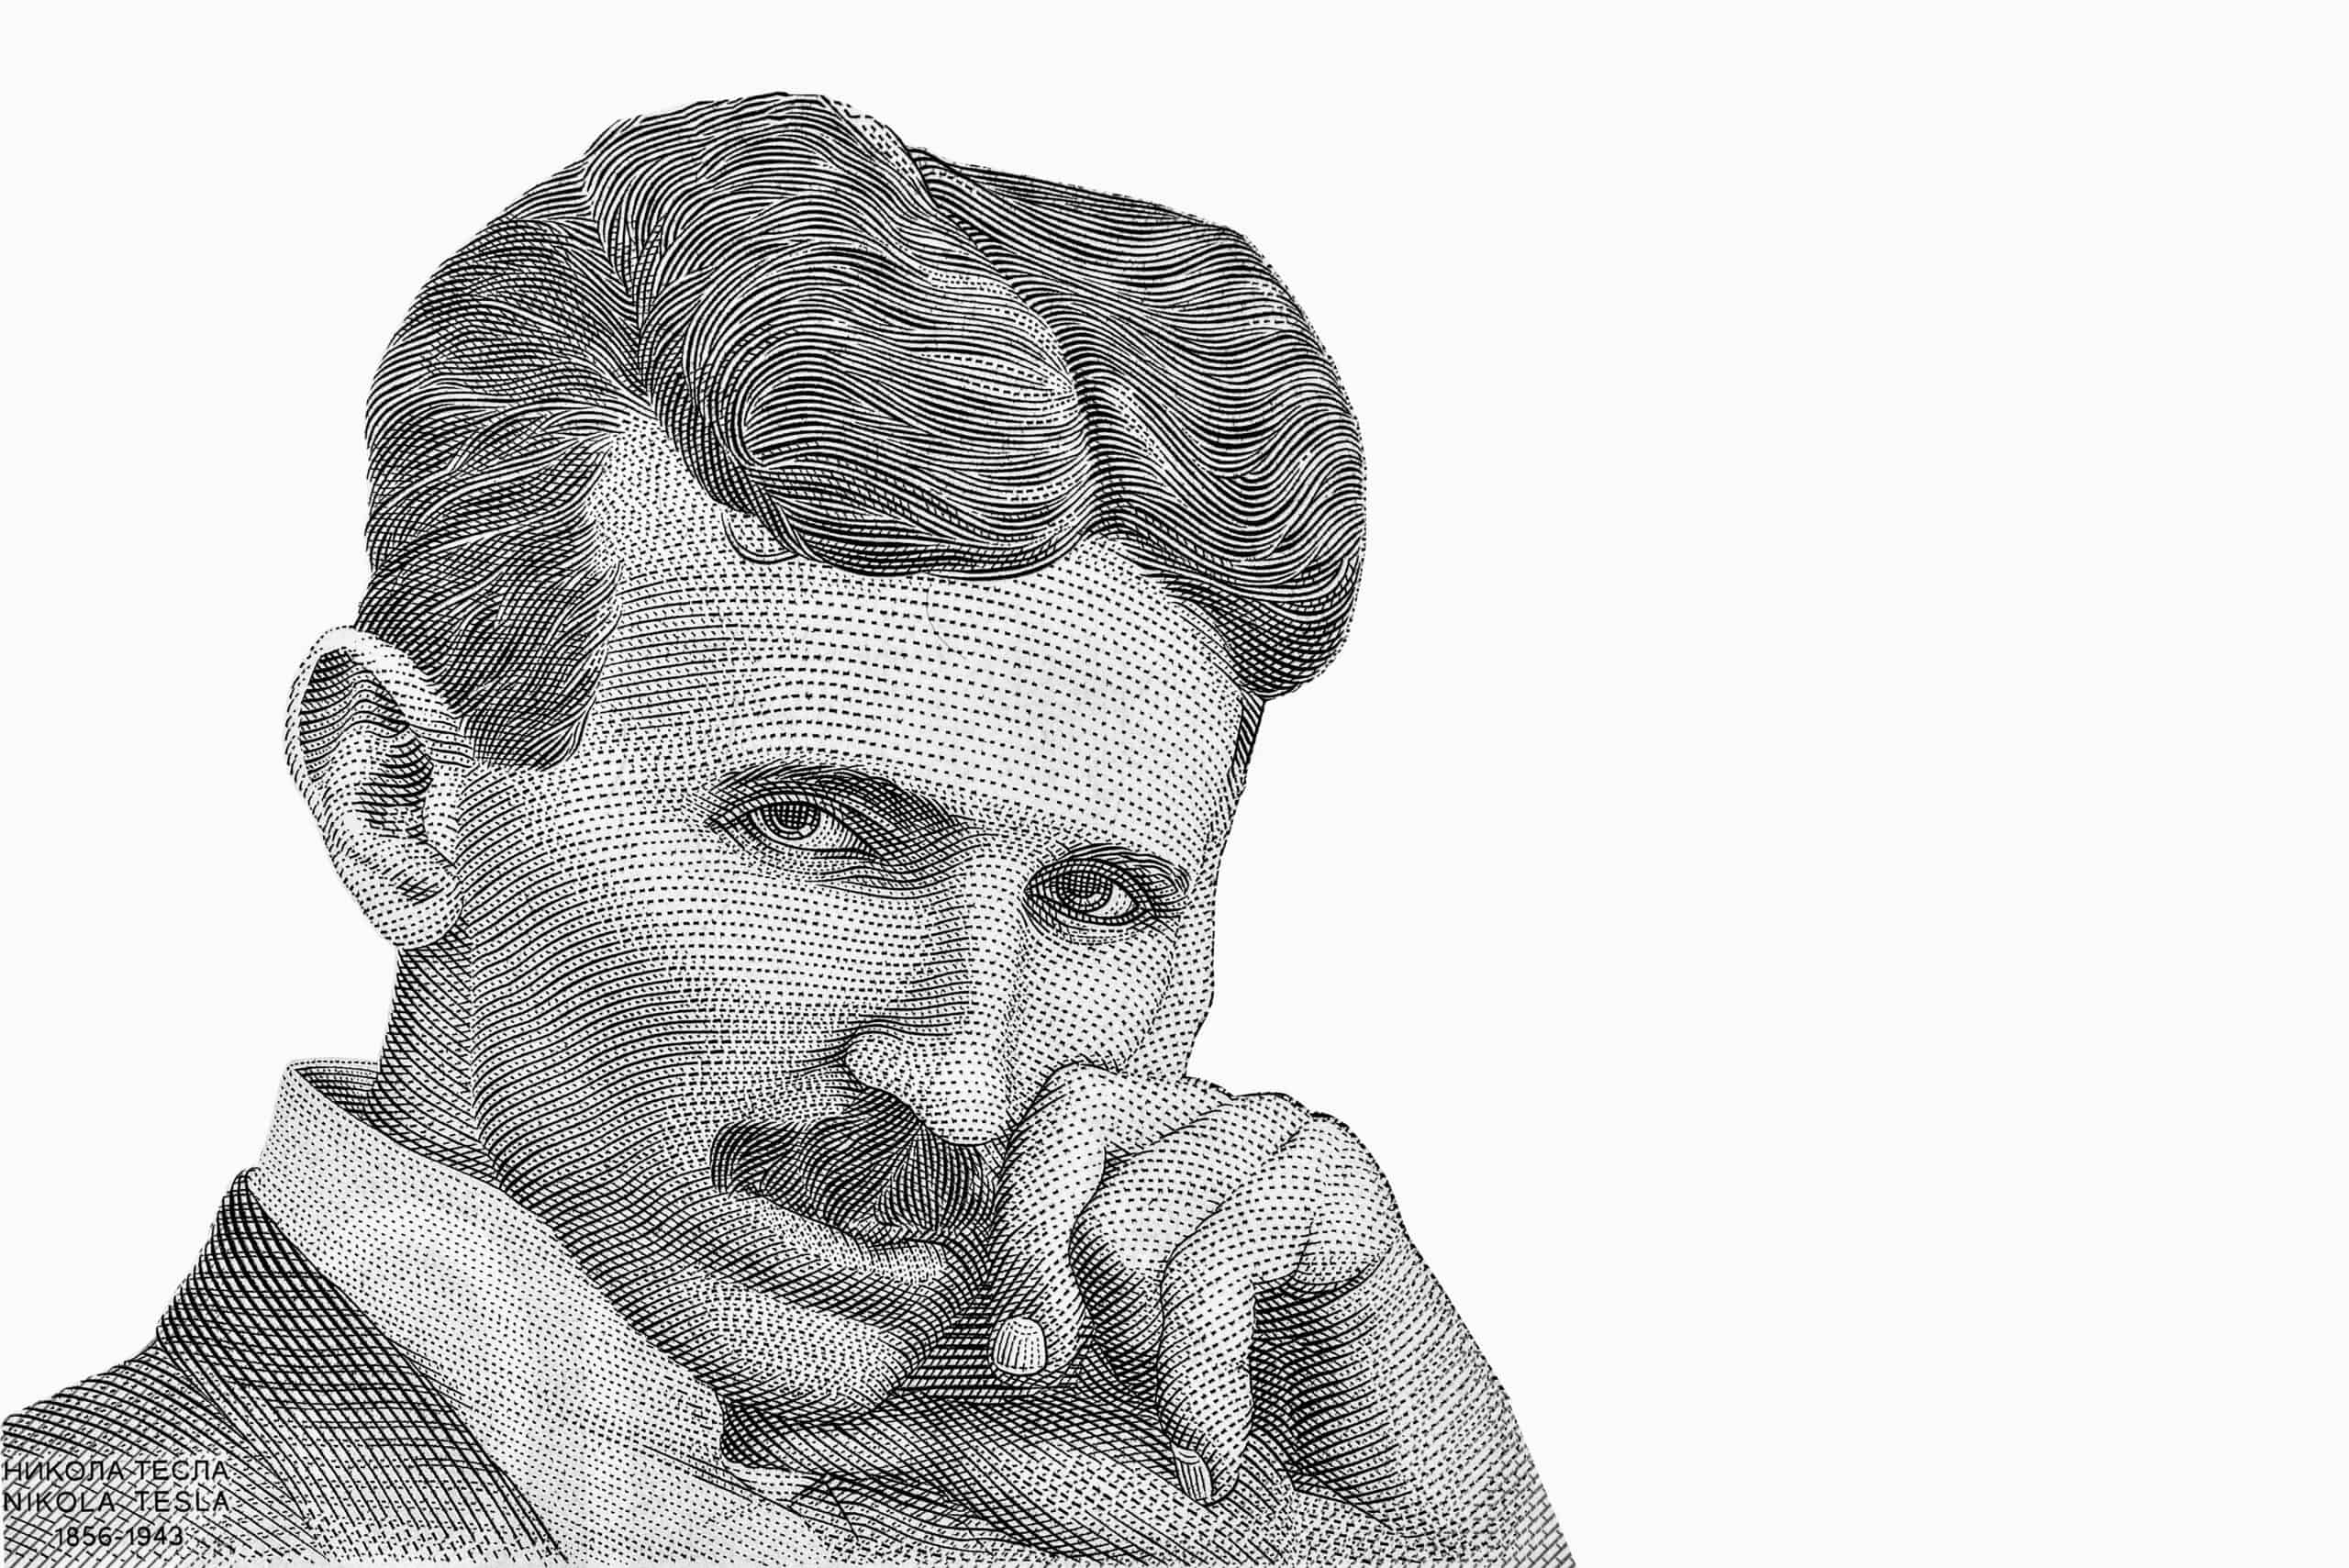 Nikola Tesla - Complete Biography, History, and Inventions.